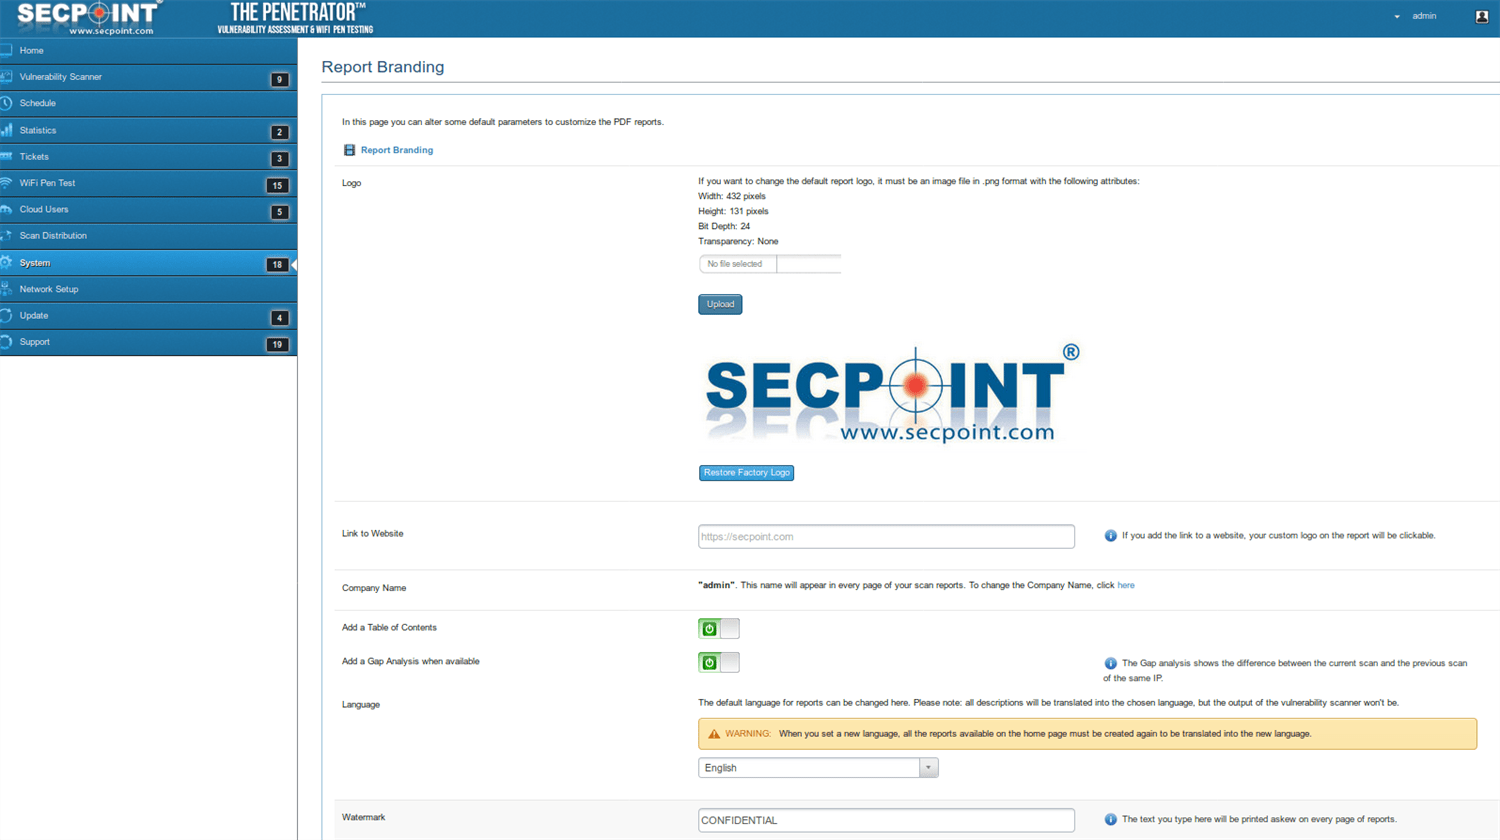 SecPoint Penetrator S9 - 8 IP Concurrent Scan License 1 Year Renewal - SecPoint